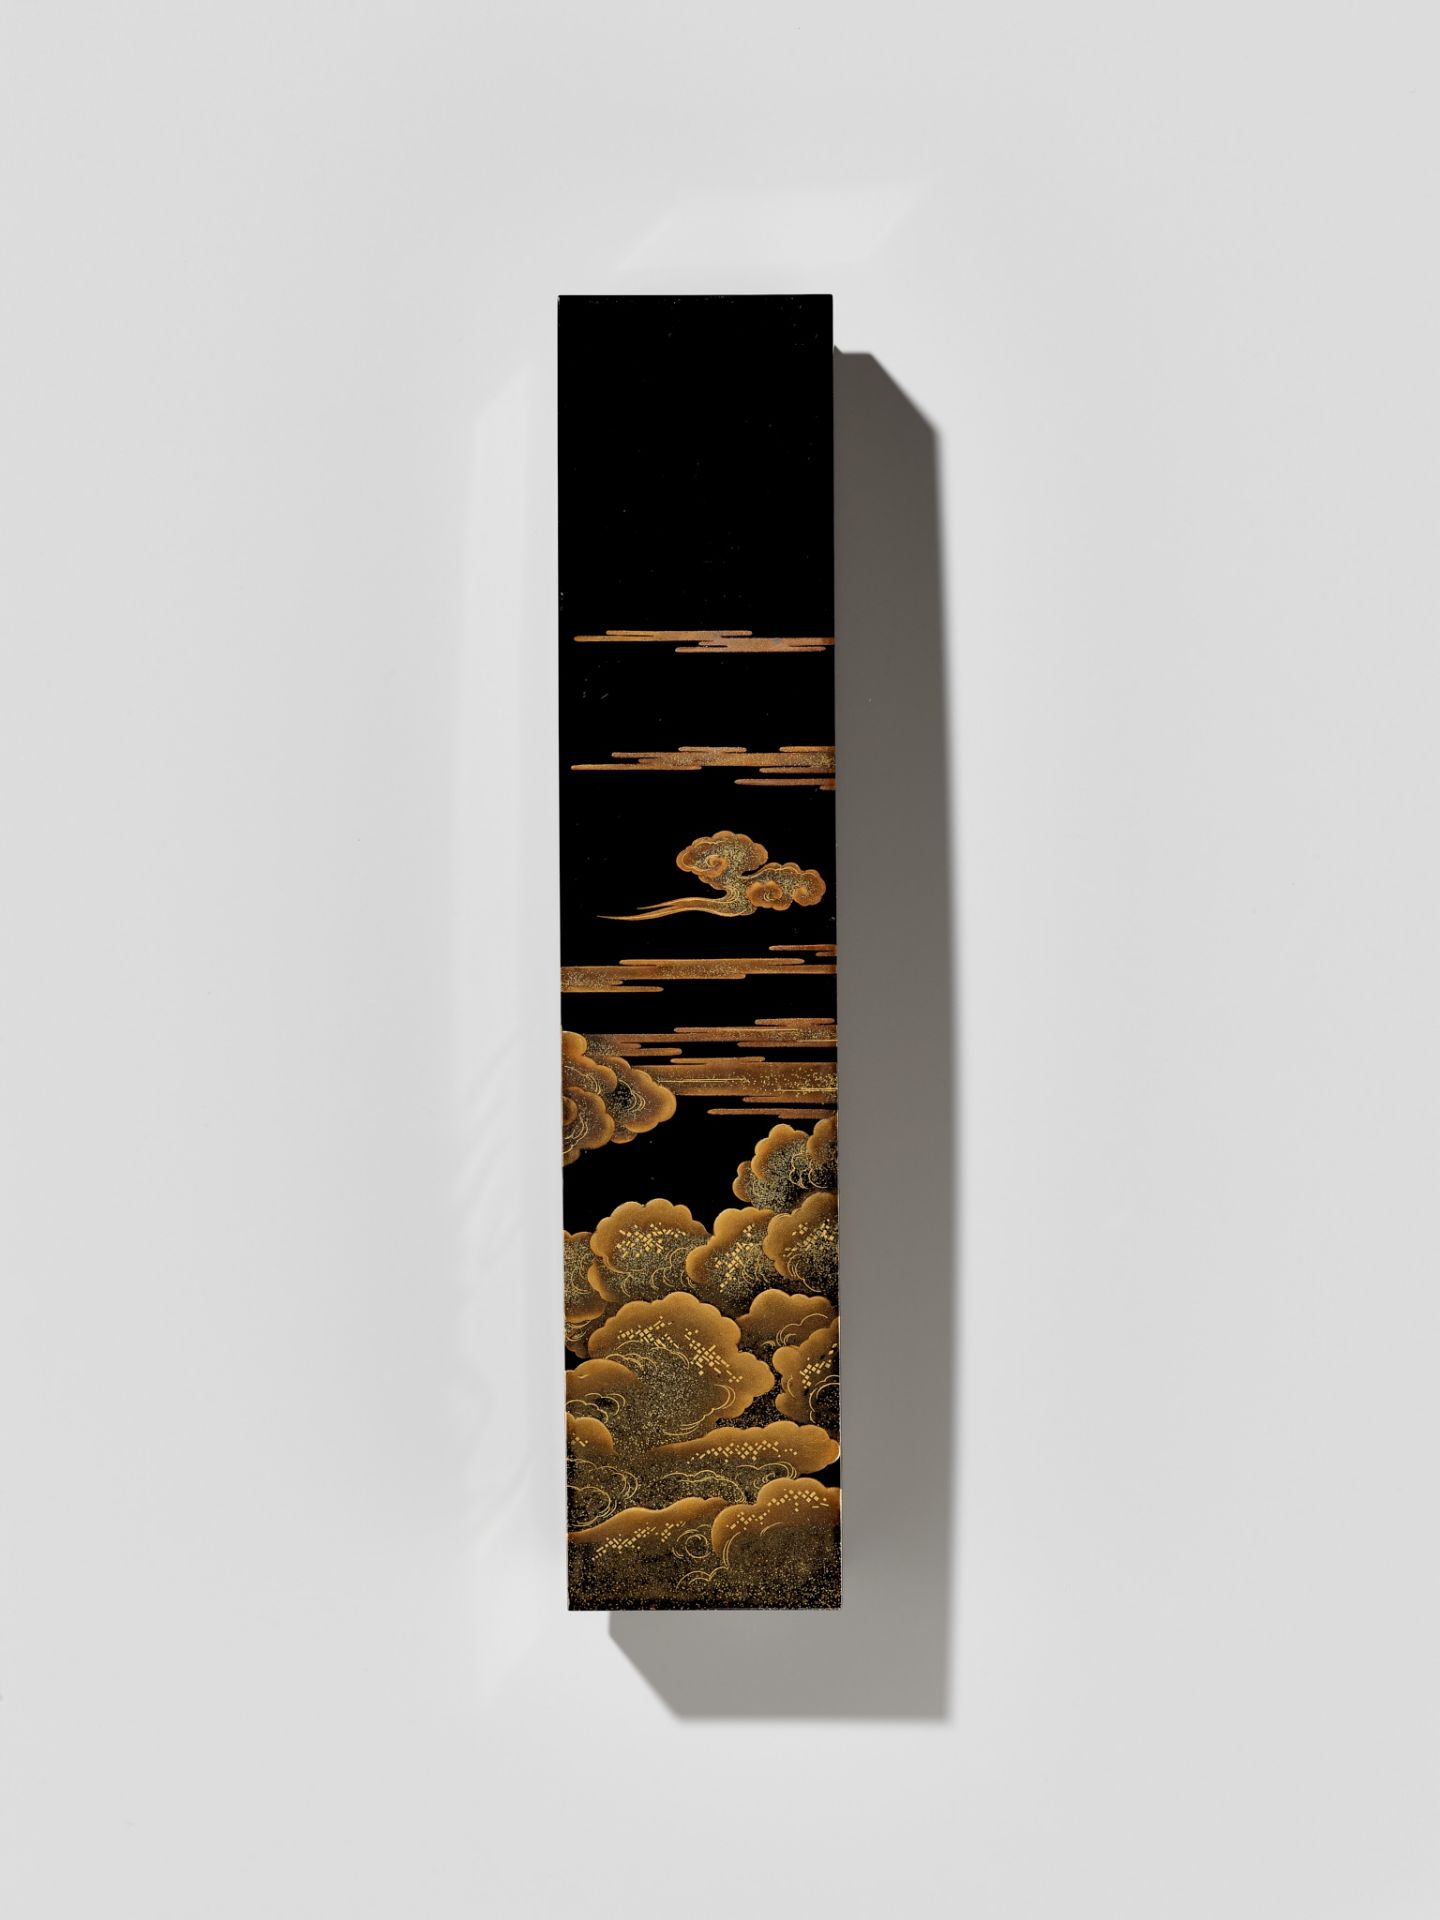 A MAGNIFICENT LACQUER WRITING SET WITH THE RISING SUN, CRESCENT MOON AND CLOUDS - Bild 5 aus 7